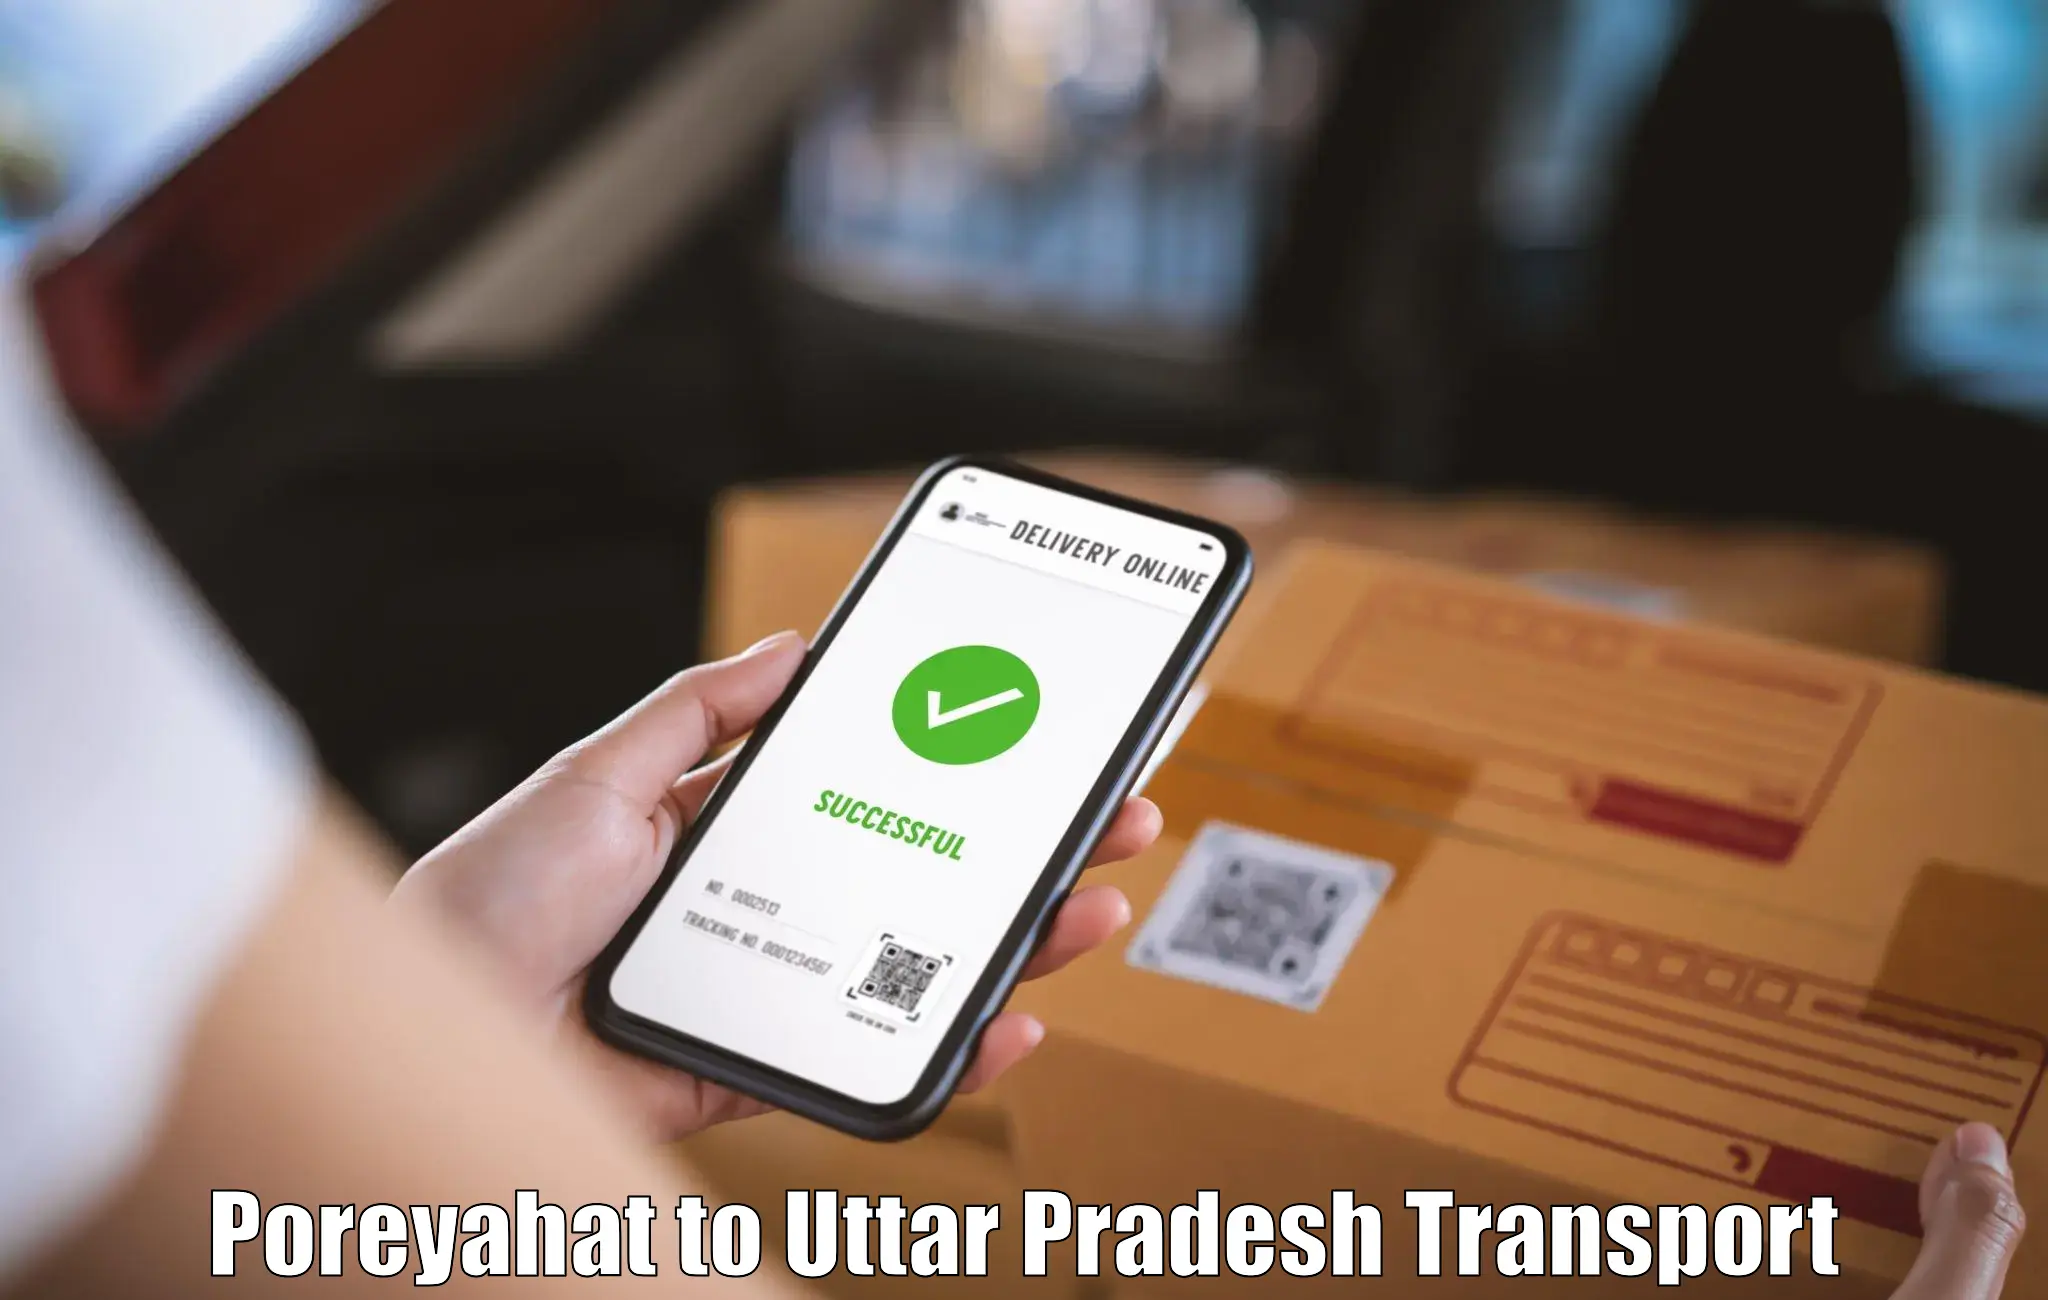 Road transport services Poreyahat to Firozabad